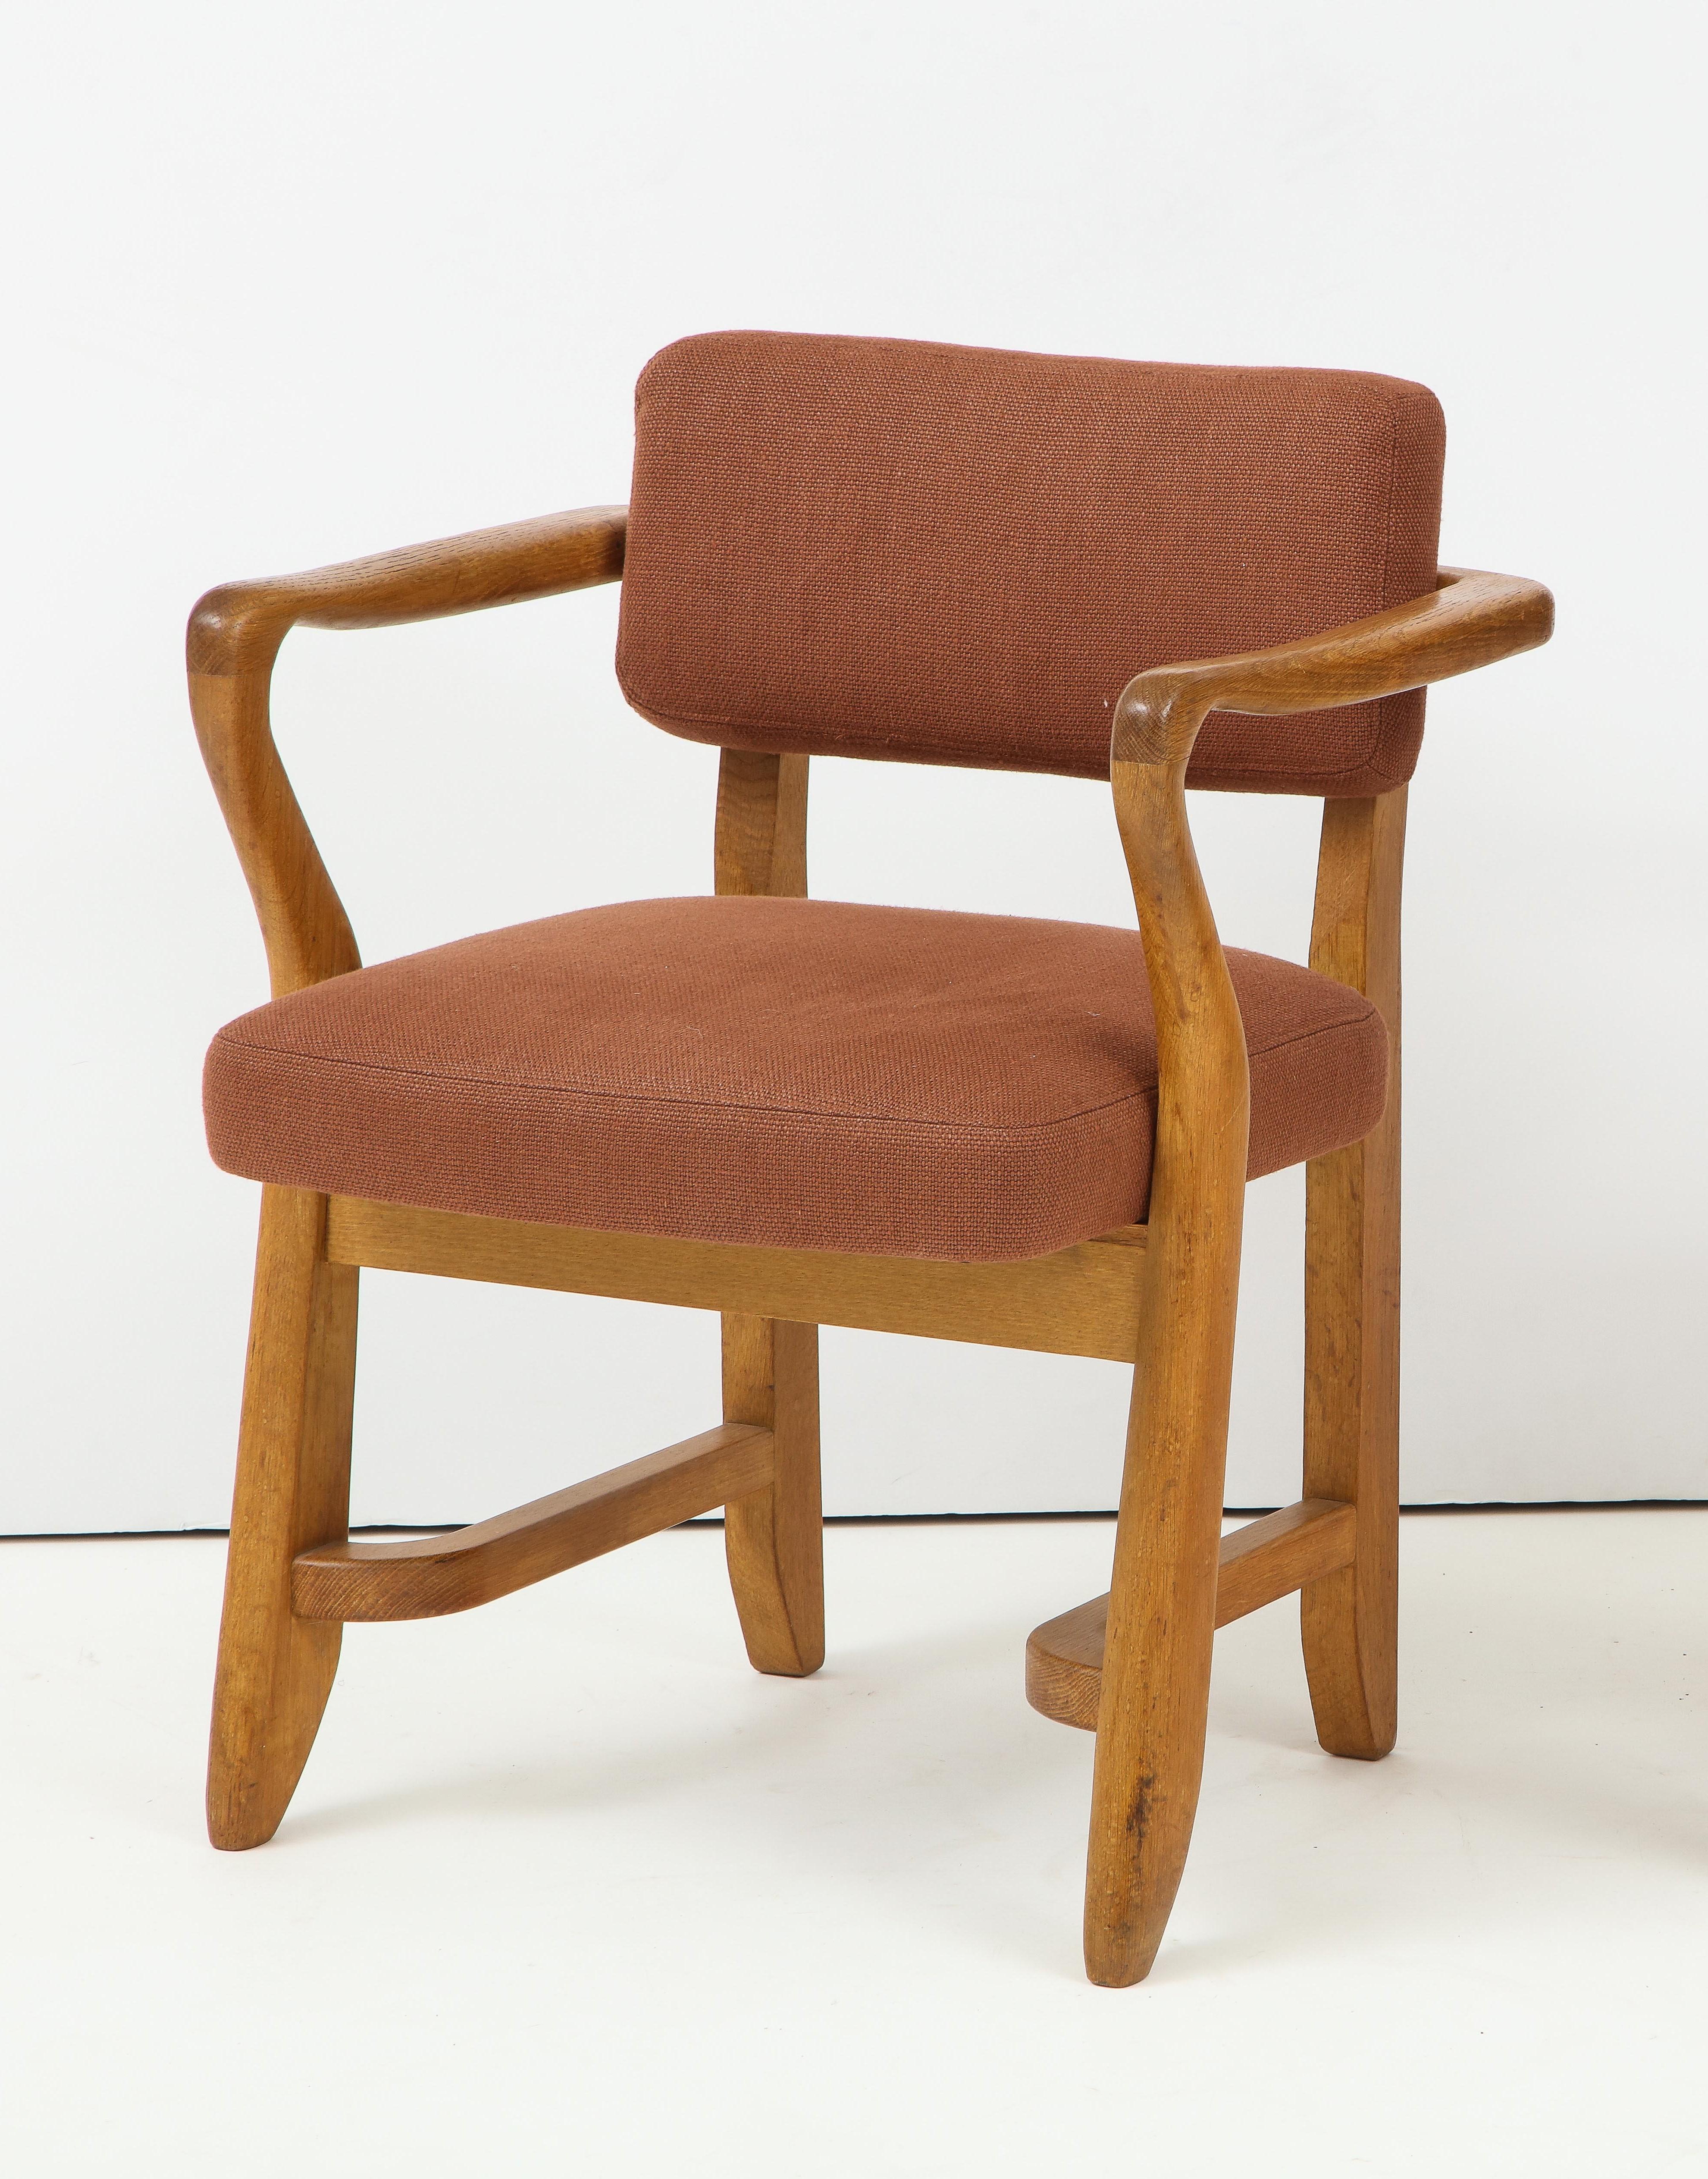 Exceptional mid-century oak armchair designed by Guillerme et Chambron, France, c. 1950s. Robert Guillerme and Jacques Chambron, the acclaimed duo behind Votre Maison, are widely celebrated for producing quality oak furniture designs that are at